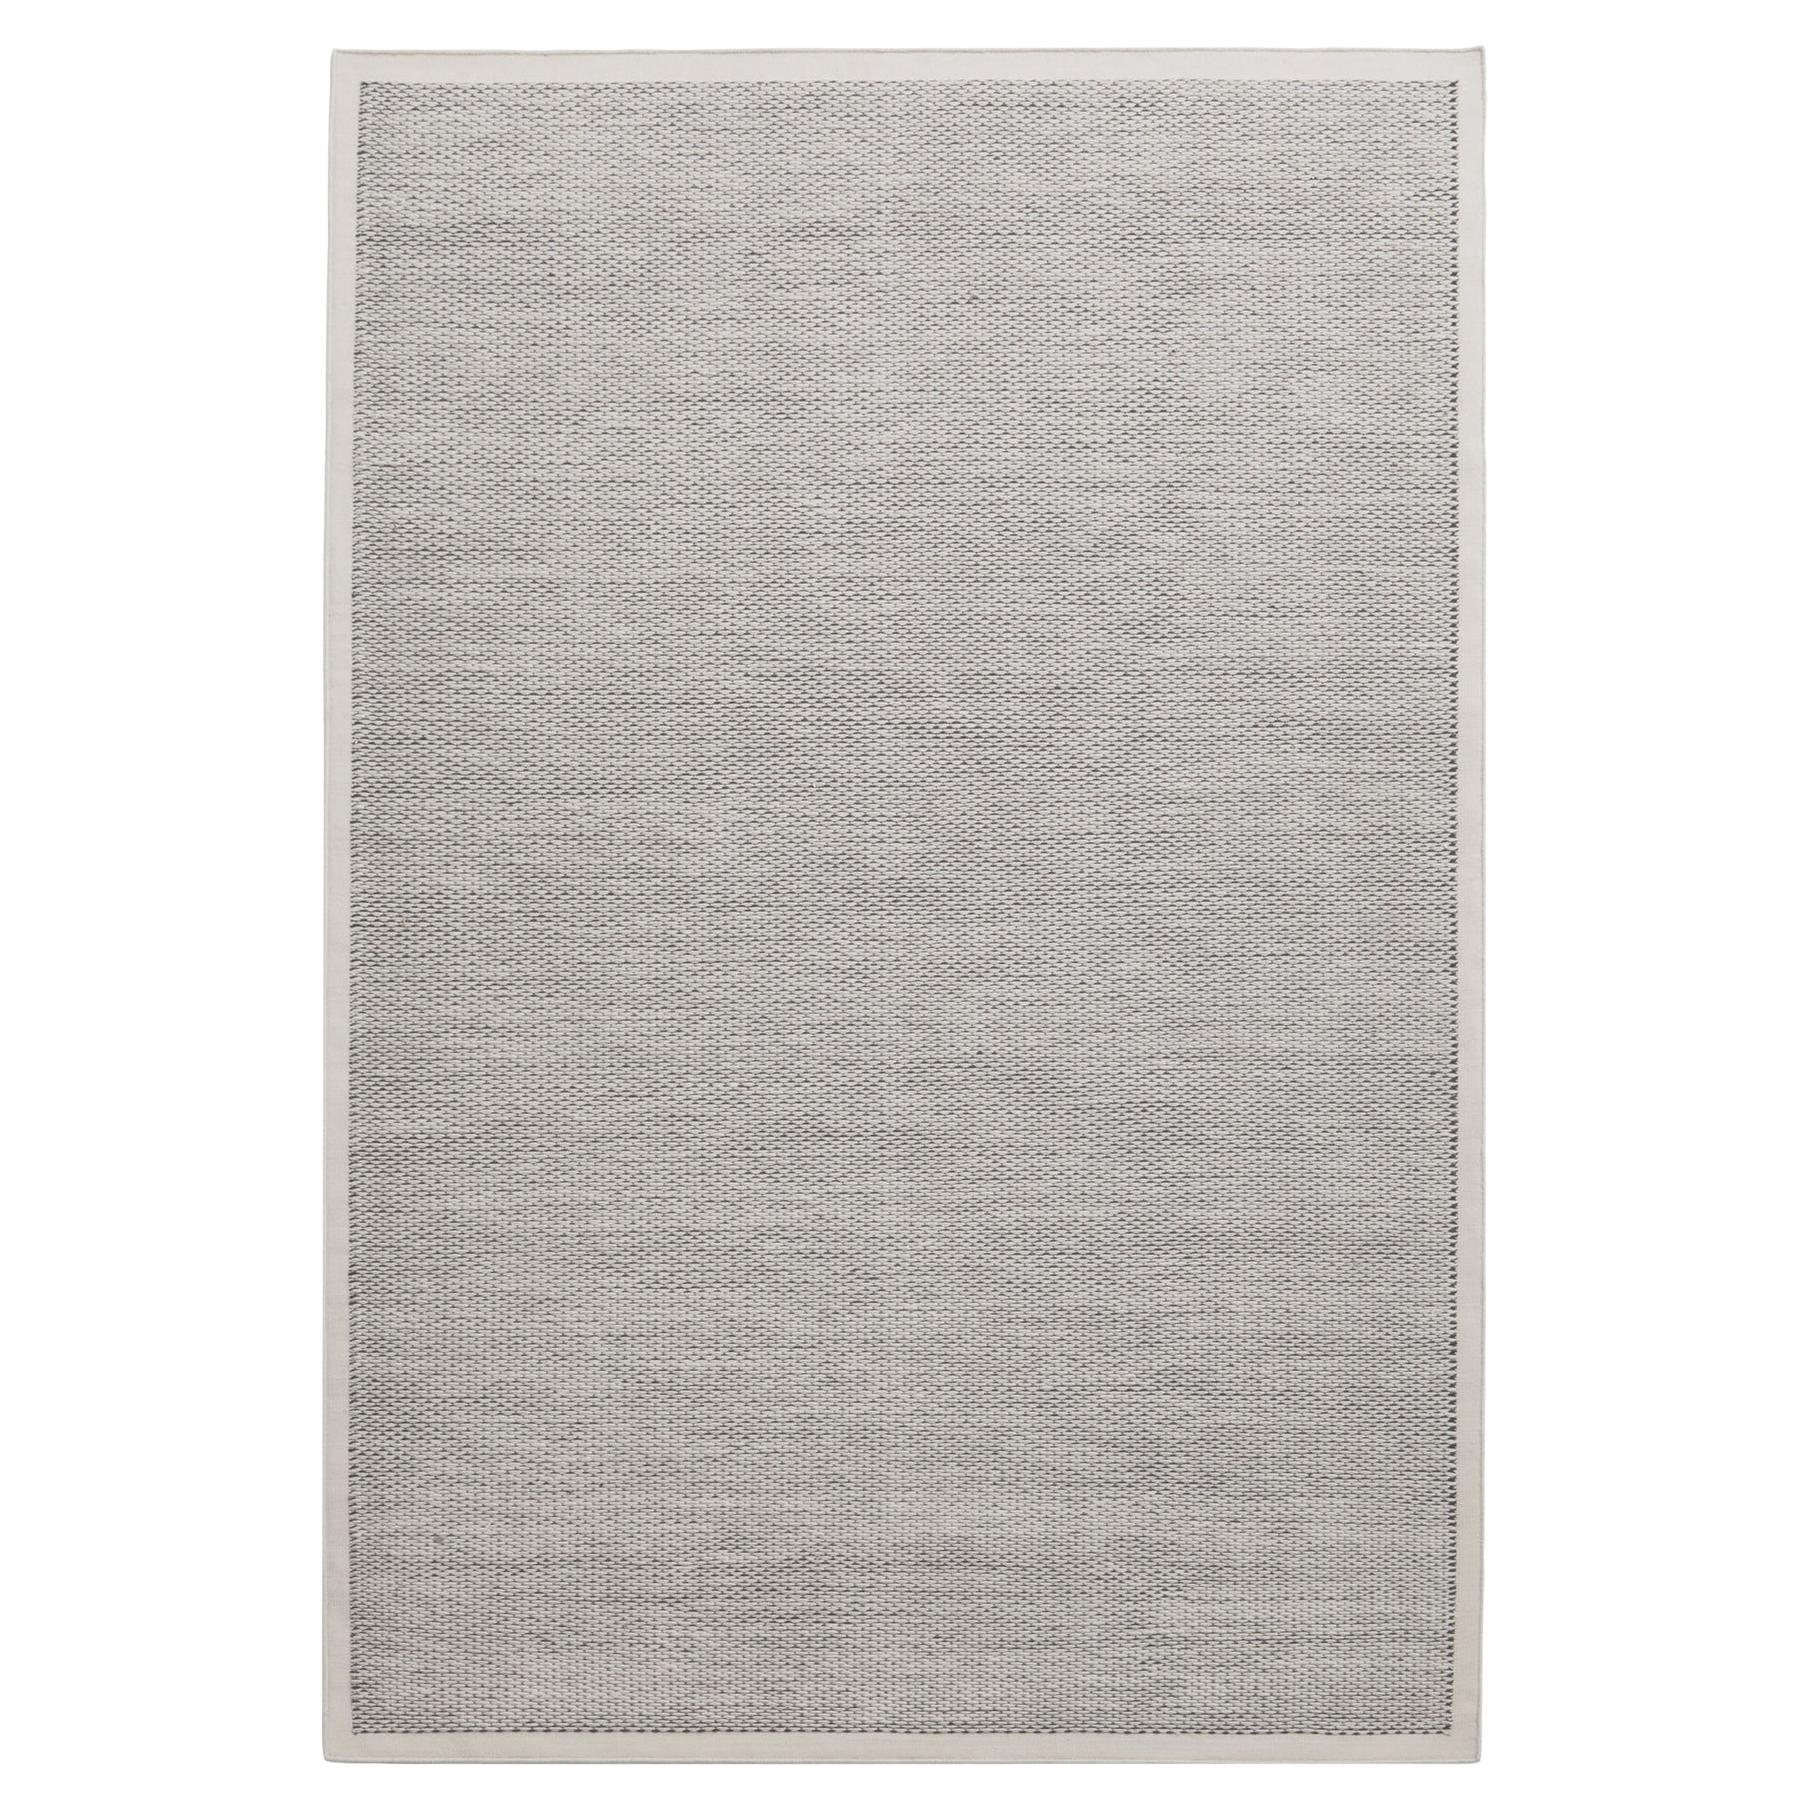 100% Merino Wool Lyxx Area Rug by Fells Andes 9' x 12' For Sale